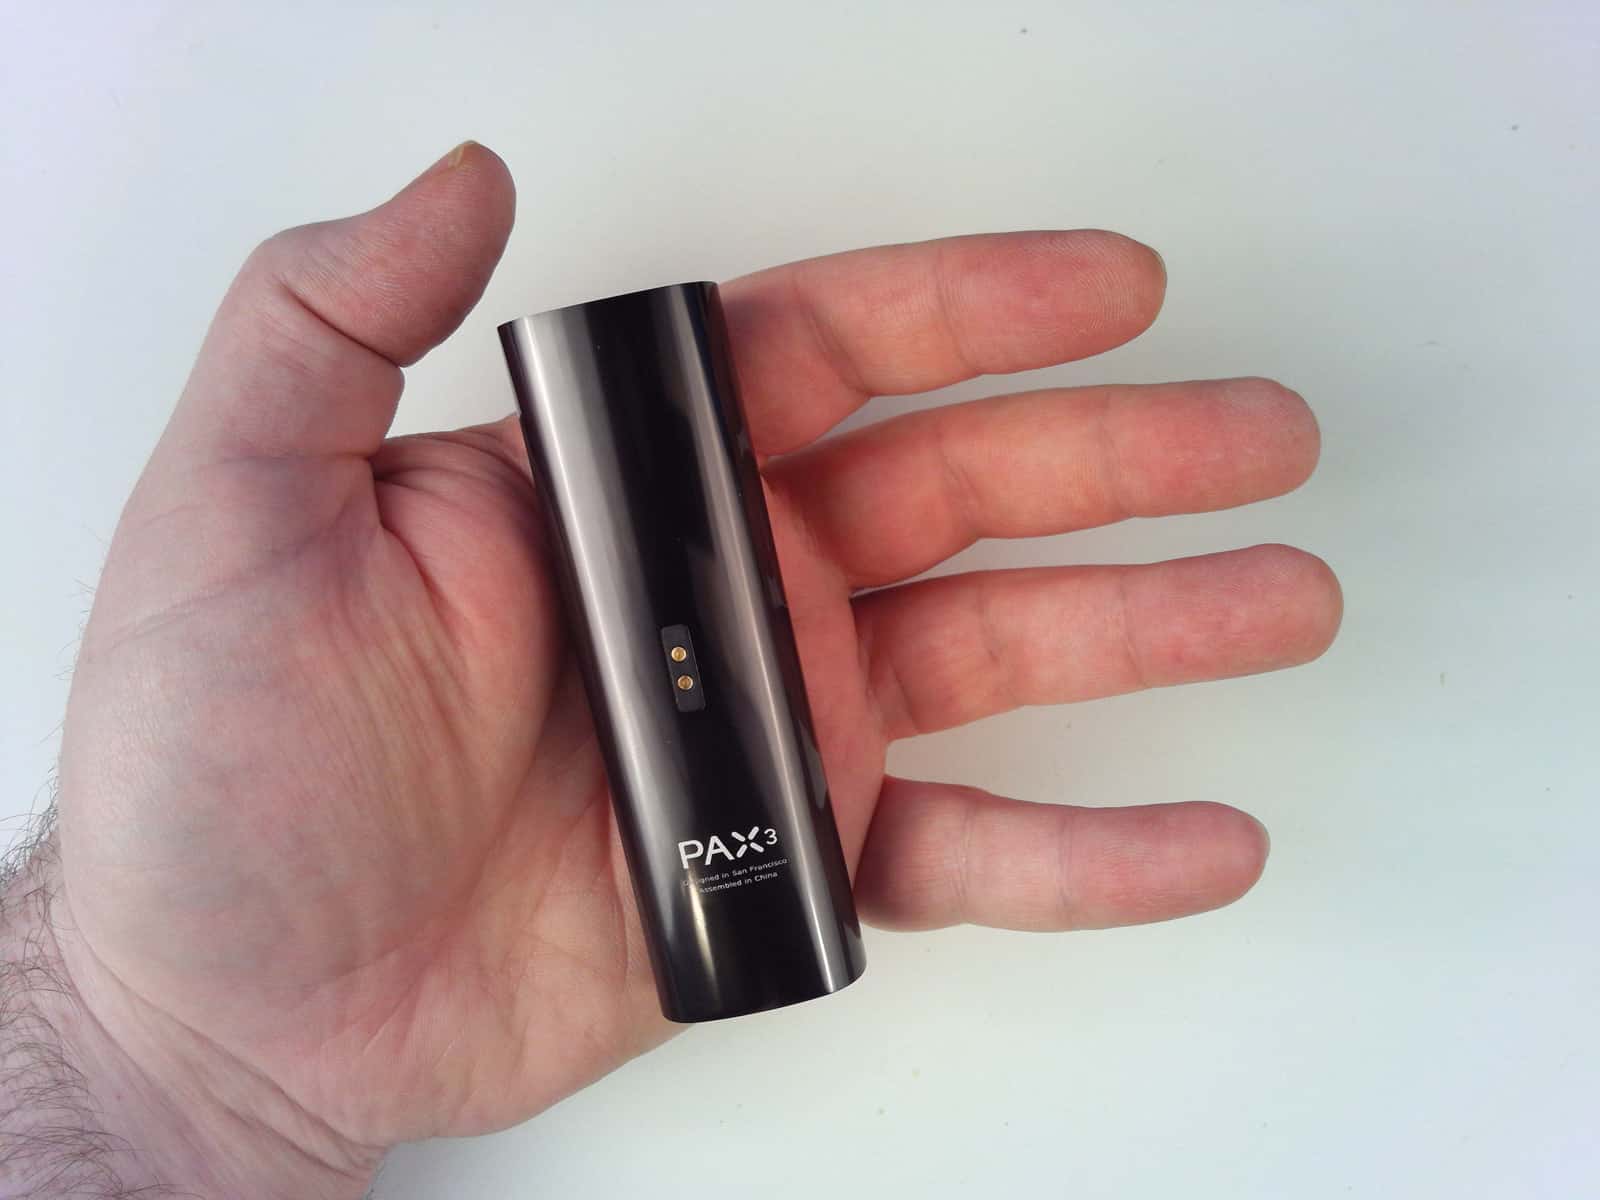 Pax 3 Vaporizer is a palm-sized dry herb vape with simple interface